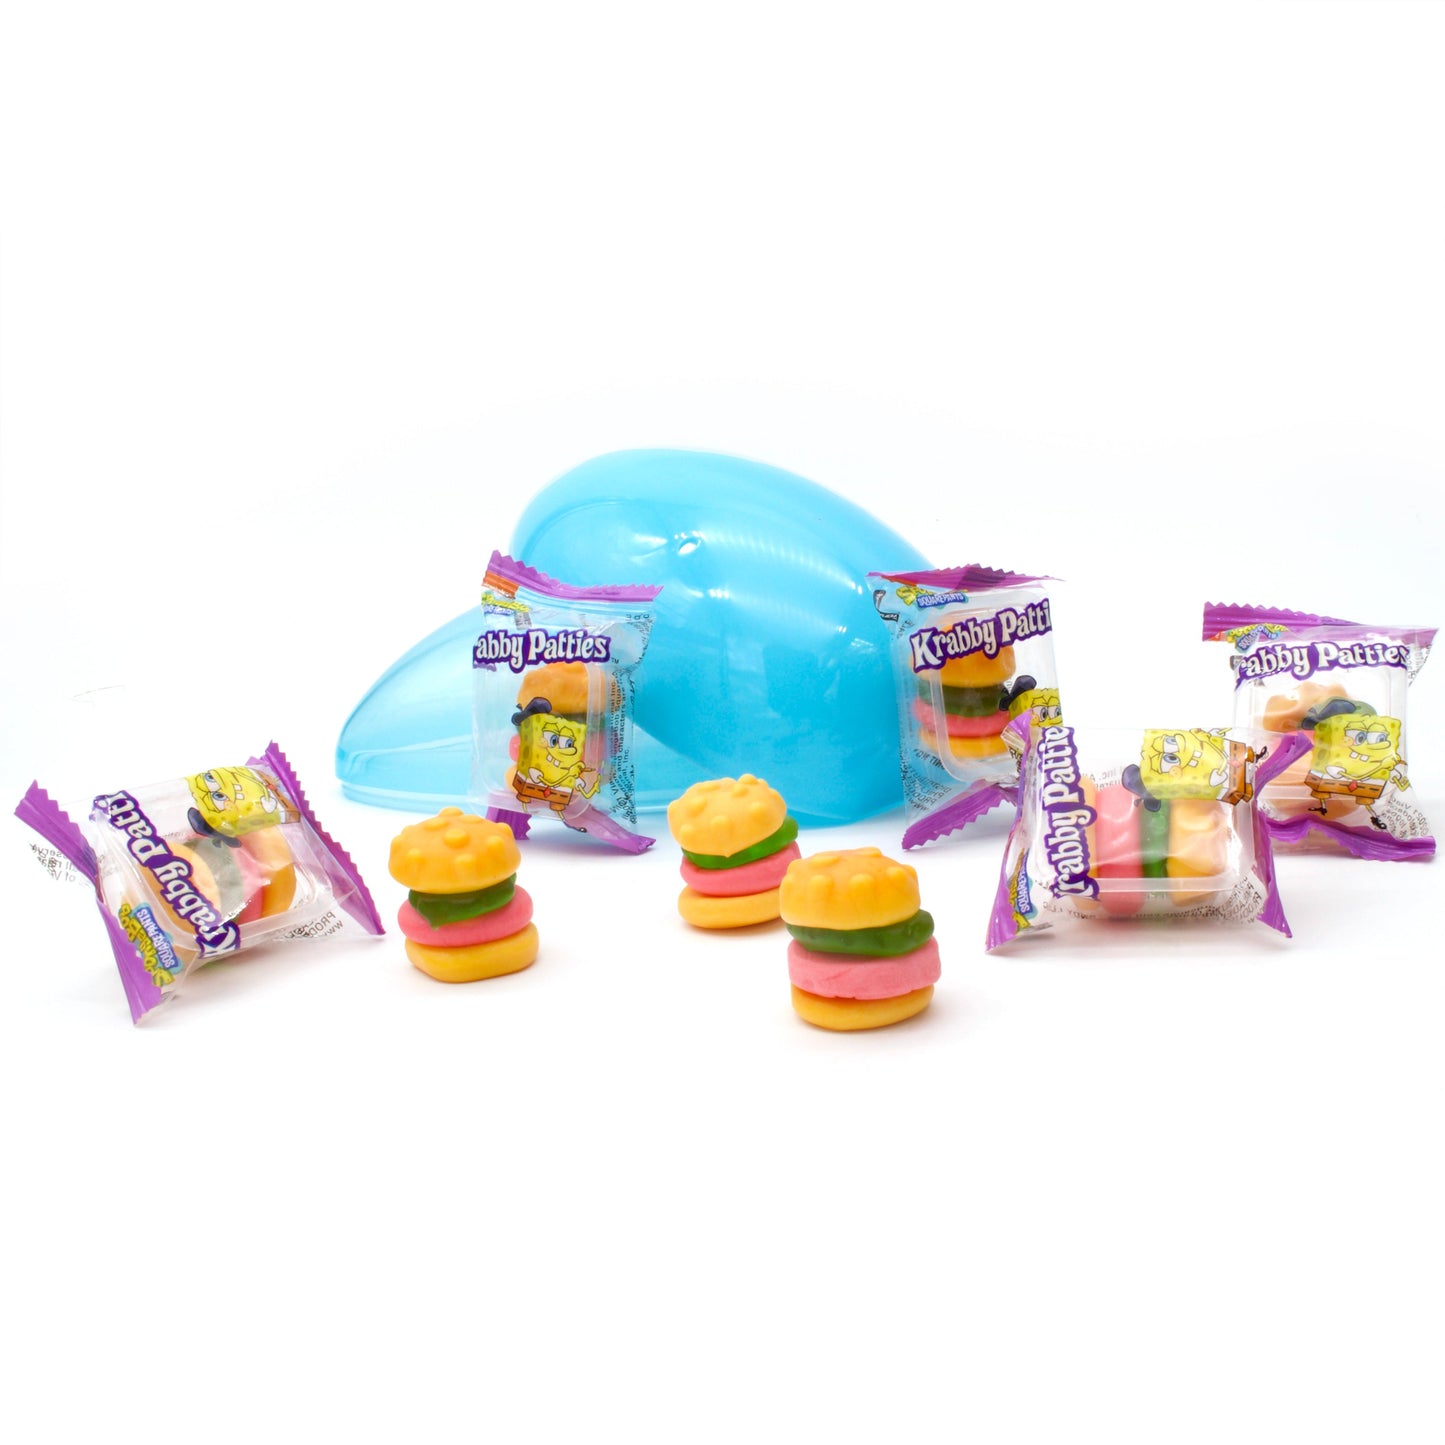 Opened blue plastic egg surrounded by individually wrapped and unwrapped krabby patties burgers gummies 